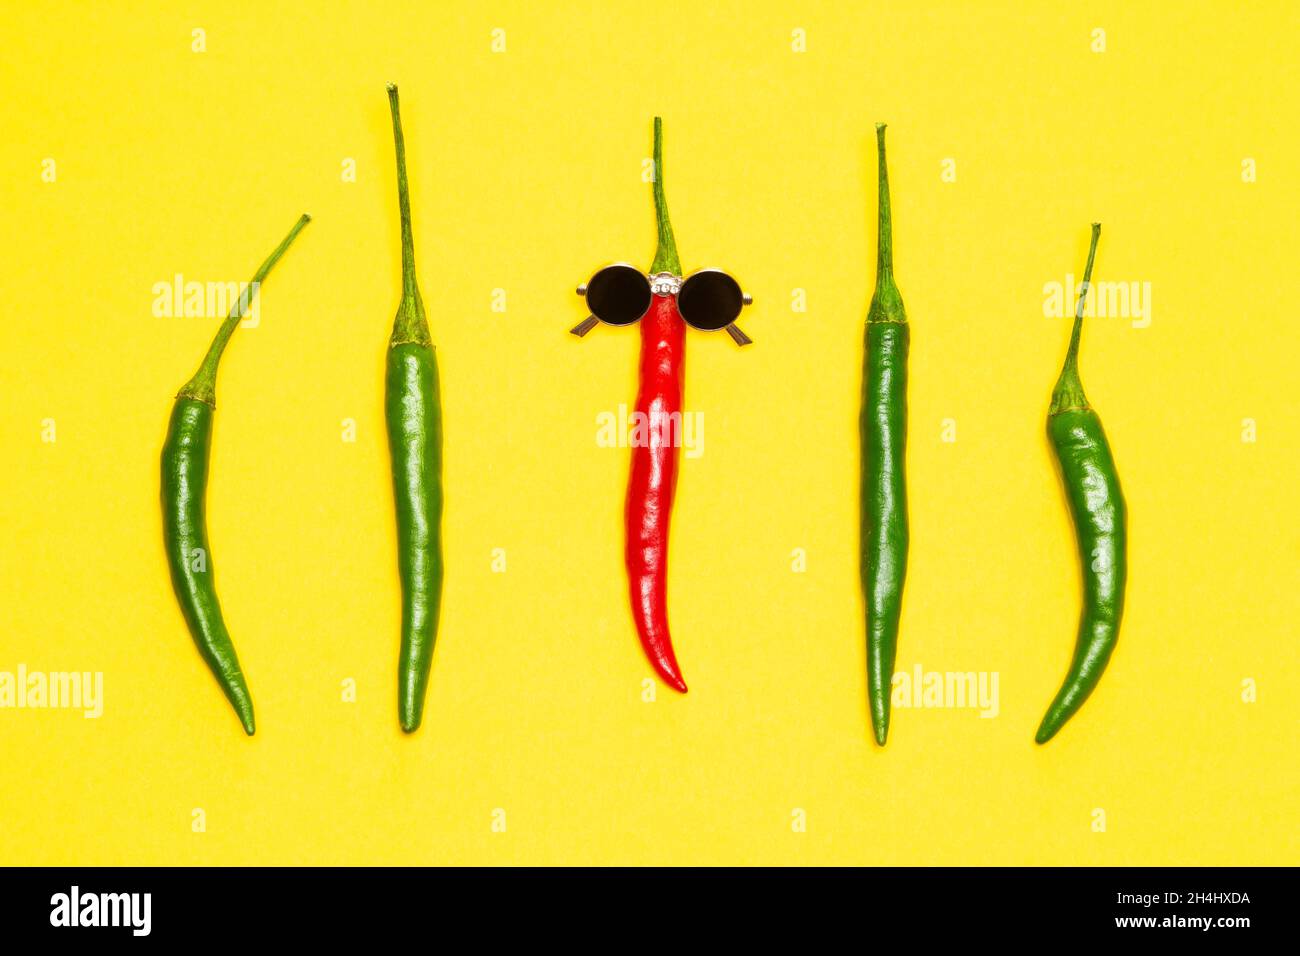 Red chili pepper in sunglasses surrounded by green peppers. The coolest guy, party goer bright funny concept Stock Photo